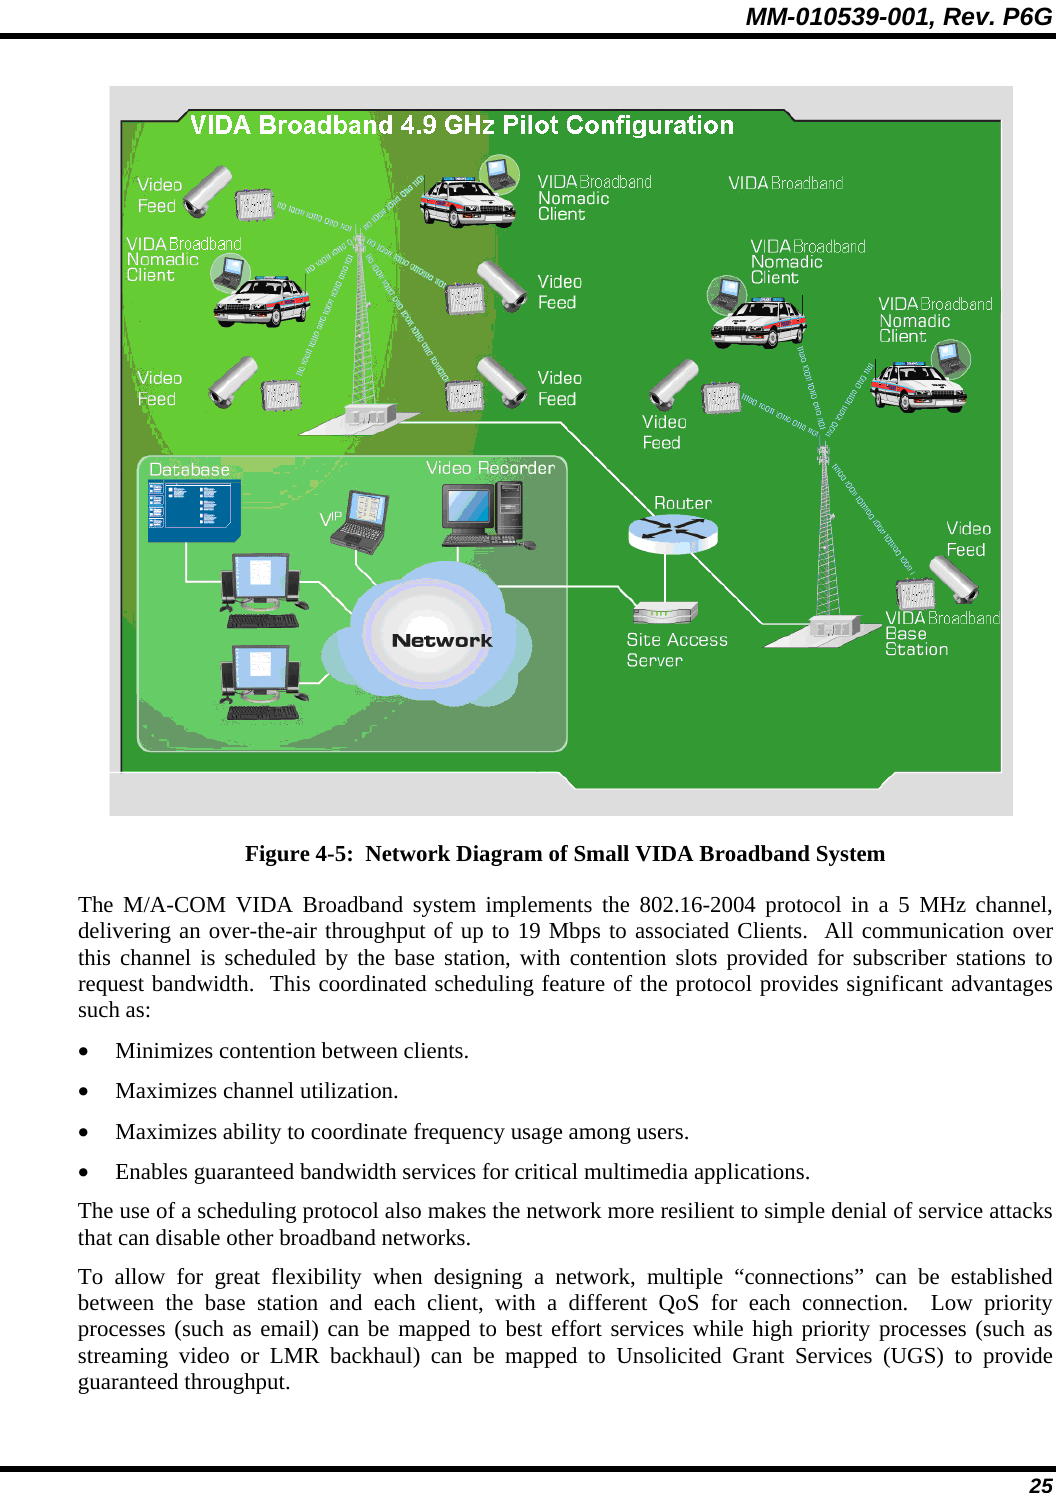 MM-010539-001, Rev. P6G  25  Figure 4-5:  Network Diagram of Small VIDA Broadband System  The M/A-COM VIDA Broadband system implements the 802.16-2004 protocol in a 5 MHz channel, delivering an over-the-air throughput of up to 19 Mbps to associated Clients.  All communication over this channel is scheduled by the base station, with contention slots provided for subscriber stations to request bandwidth.  This coordinated scheduling feature of the protocol provides significant advantages such as: • Minimizes contention between clients. • Maximizes channel utilization. • Maximizes ability to coordinate frequency usage among users. • Enables guaranteed bandwidth services for critical multimedia applications. The use of a scheduling protocol also makes the network more resilient to simple denial of service attacks that can disable other broadband networks.  To allow for great flexibility when designing a network, multiple “connections” can be established between the base station and each client, with a different QoS for each connection.  Low priority processes (such as email) can be mapped to best effort services while high priority processes (such as streaming video or LMR backhaul) can be mapped to Unsolicited Grant Services (UGS) to provide guaranteed throughput. 